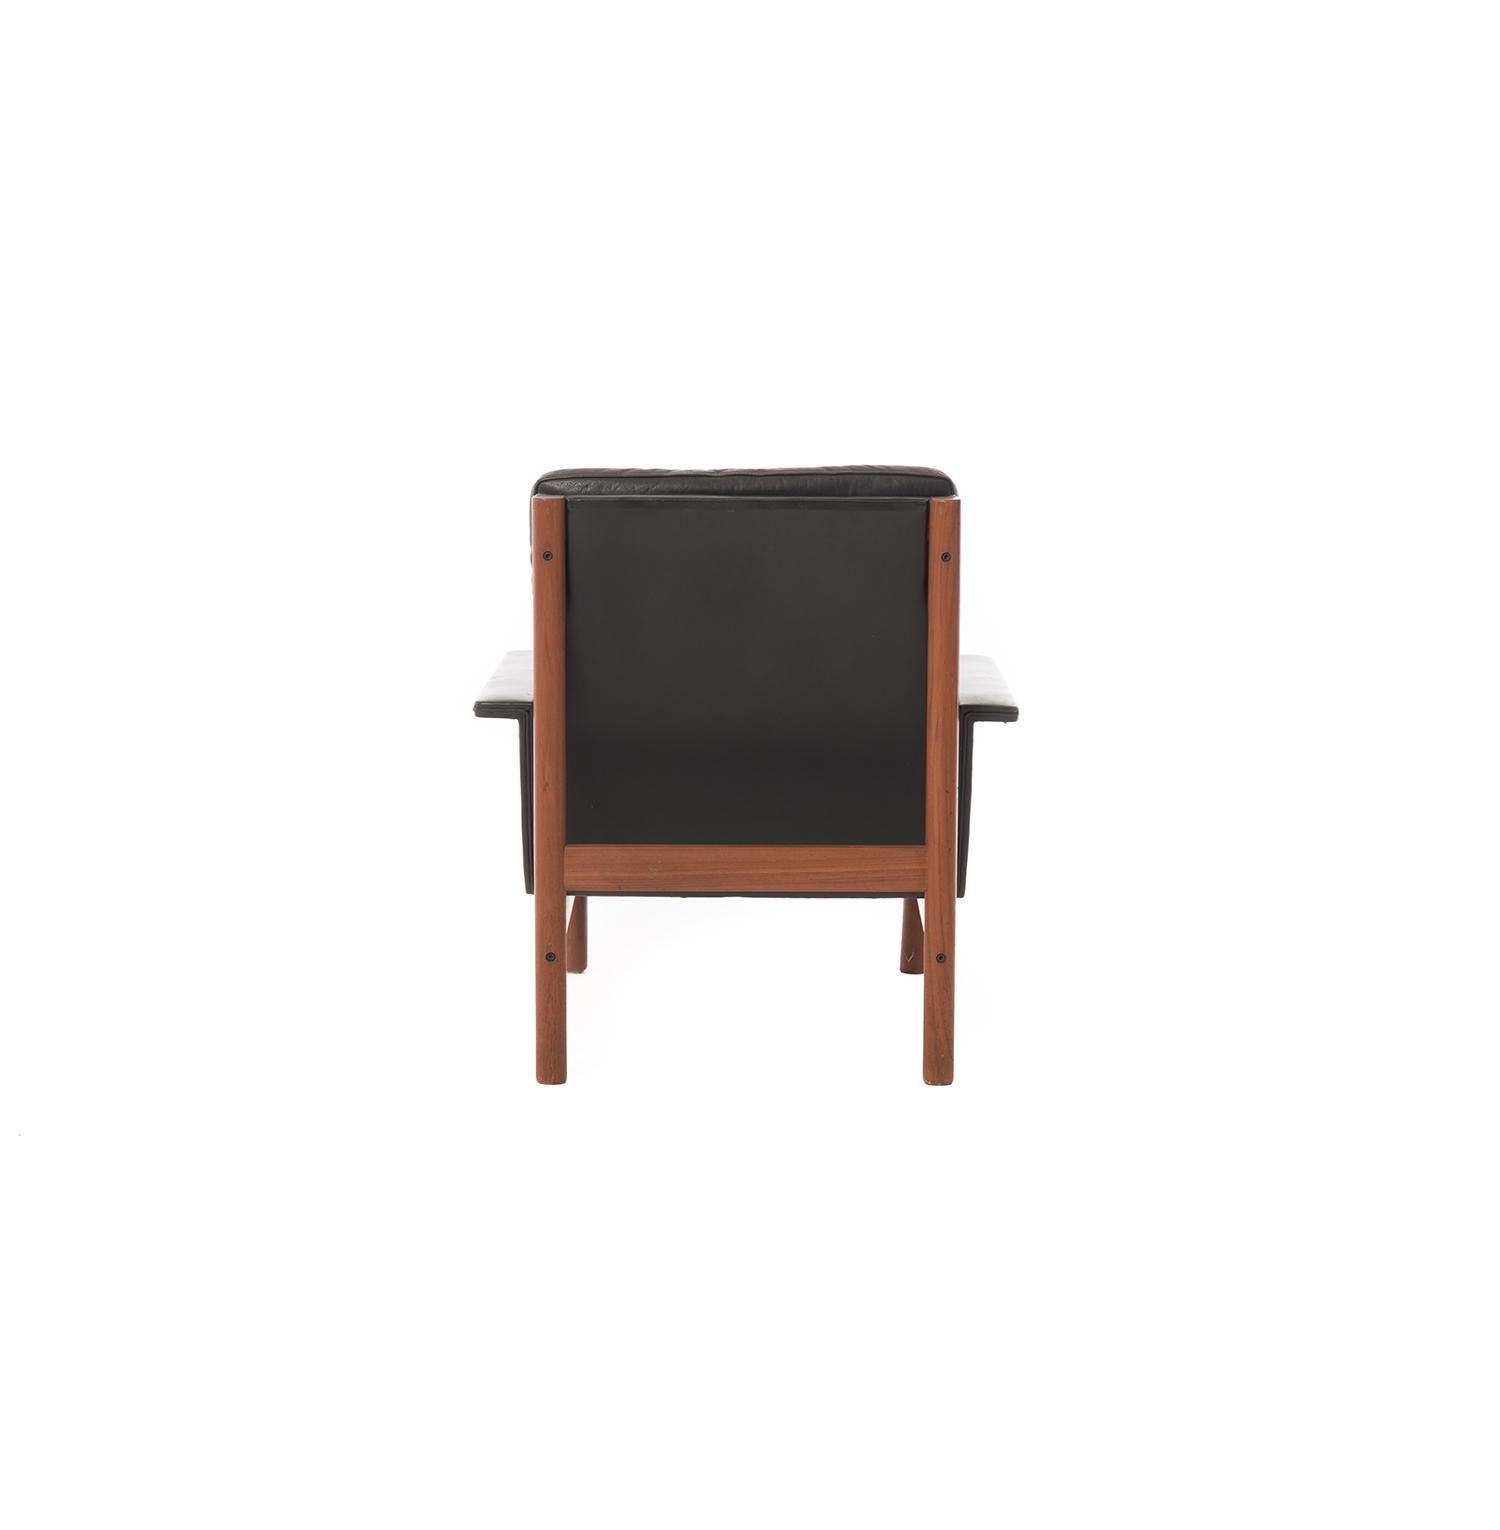 20th Century Danish Modern Easy Chair and Ottoman in Black Leather